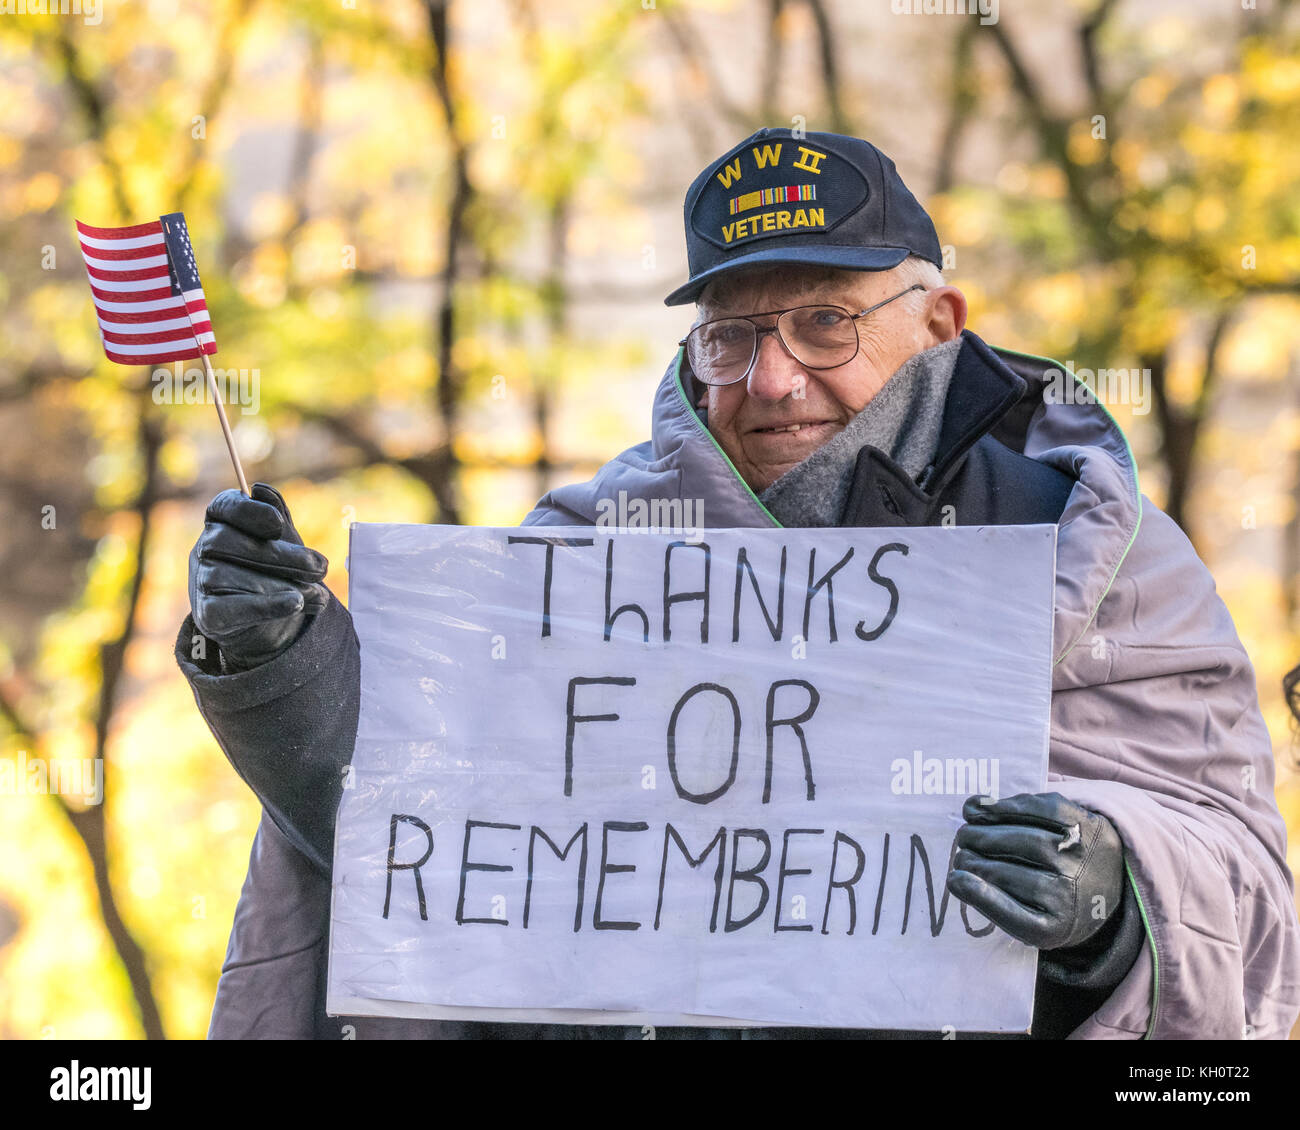 New York, USA, 11 Nov 2017.  A World War II veteran waves a US flag as he holds a sign reading 'Thanks for Remembering' from atop a float as he participates in the 2017 Veterans Day parade. Photo by Enrique Shore/Alamy Live News Stock Photo